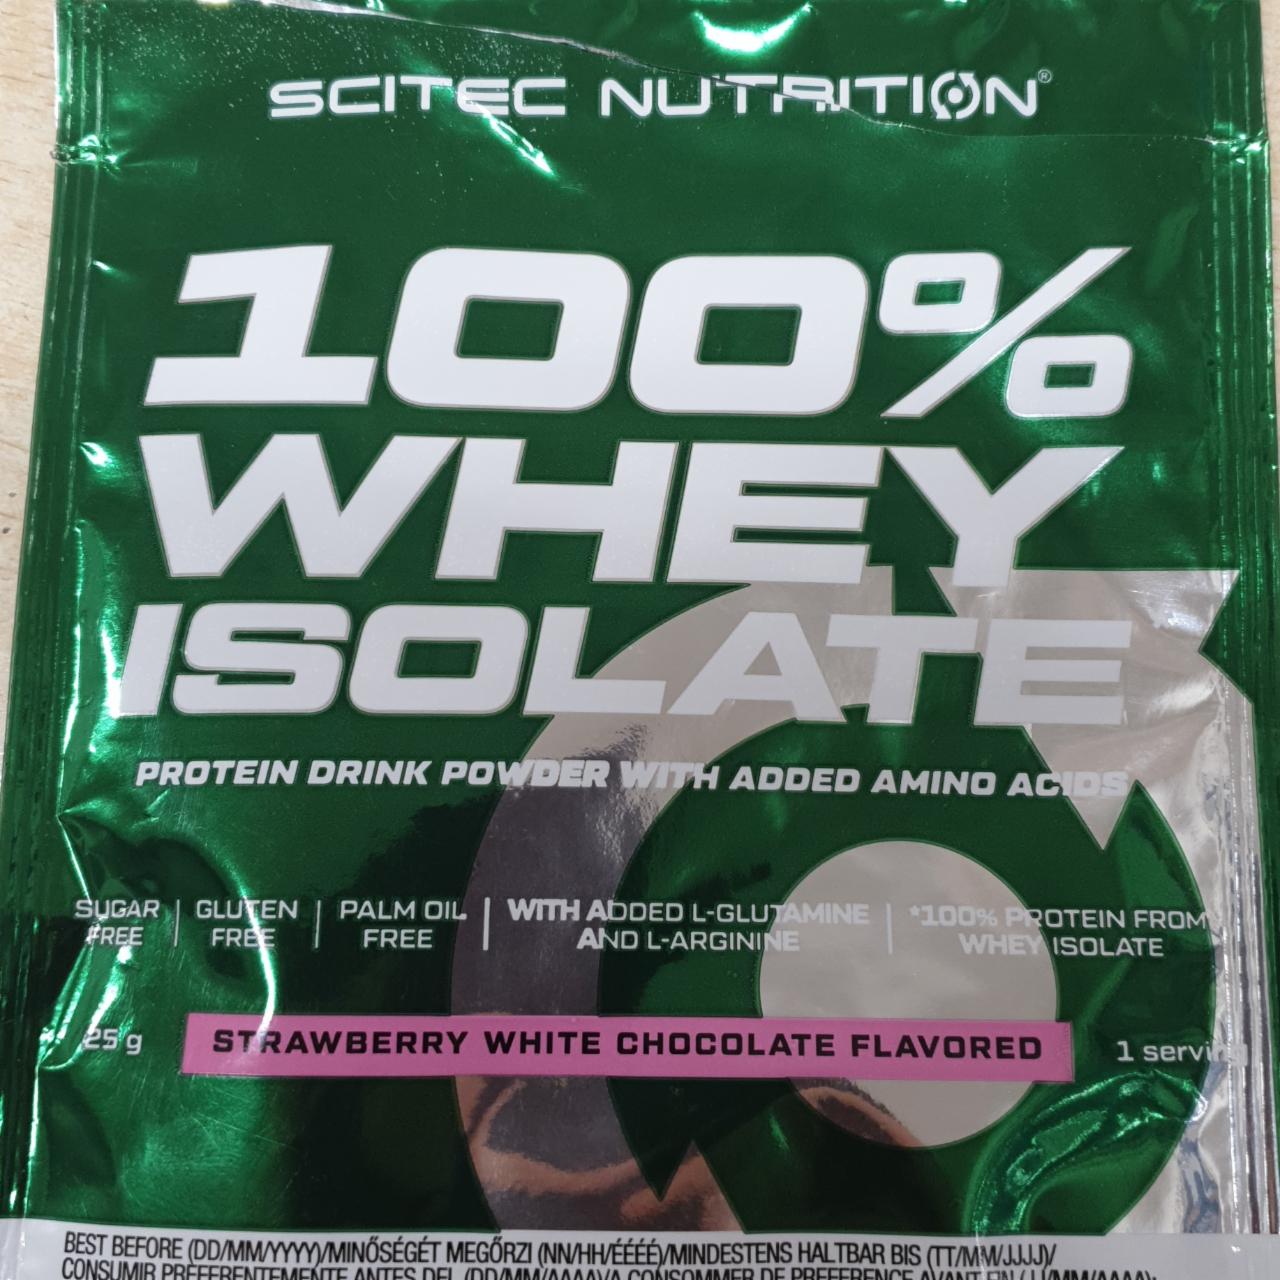 Képek - 100% whey isolate protein drink Strawberry white chocolate Scitec Nutrition